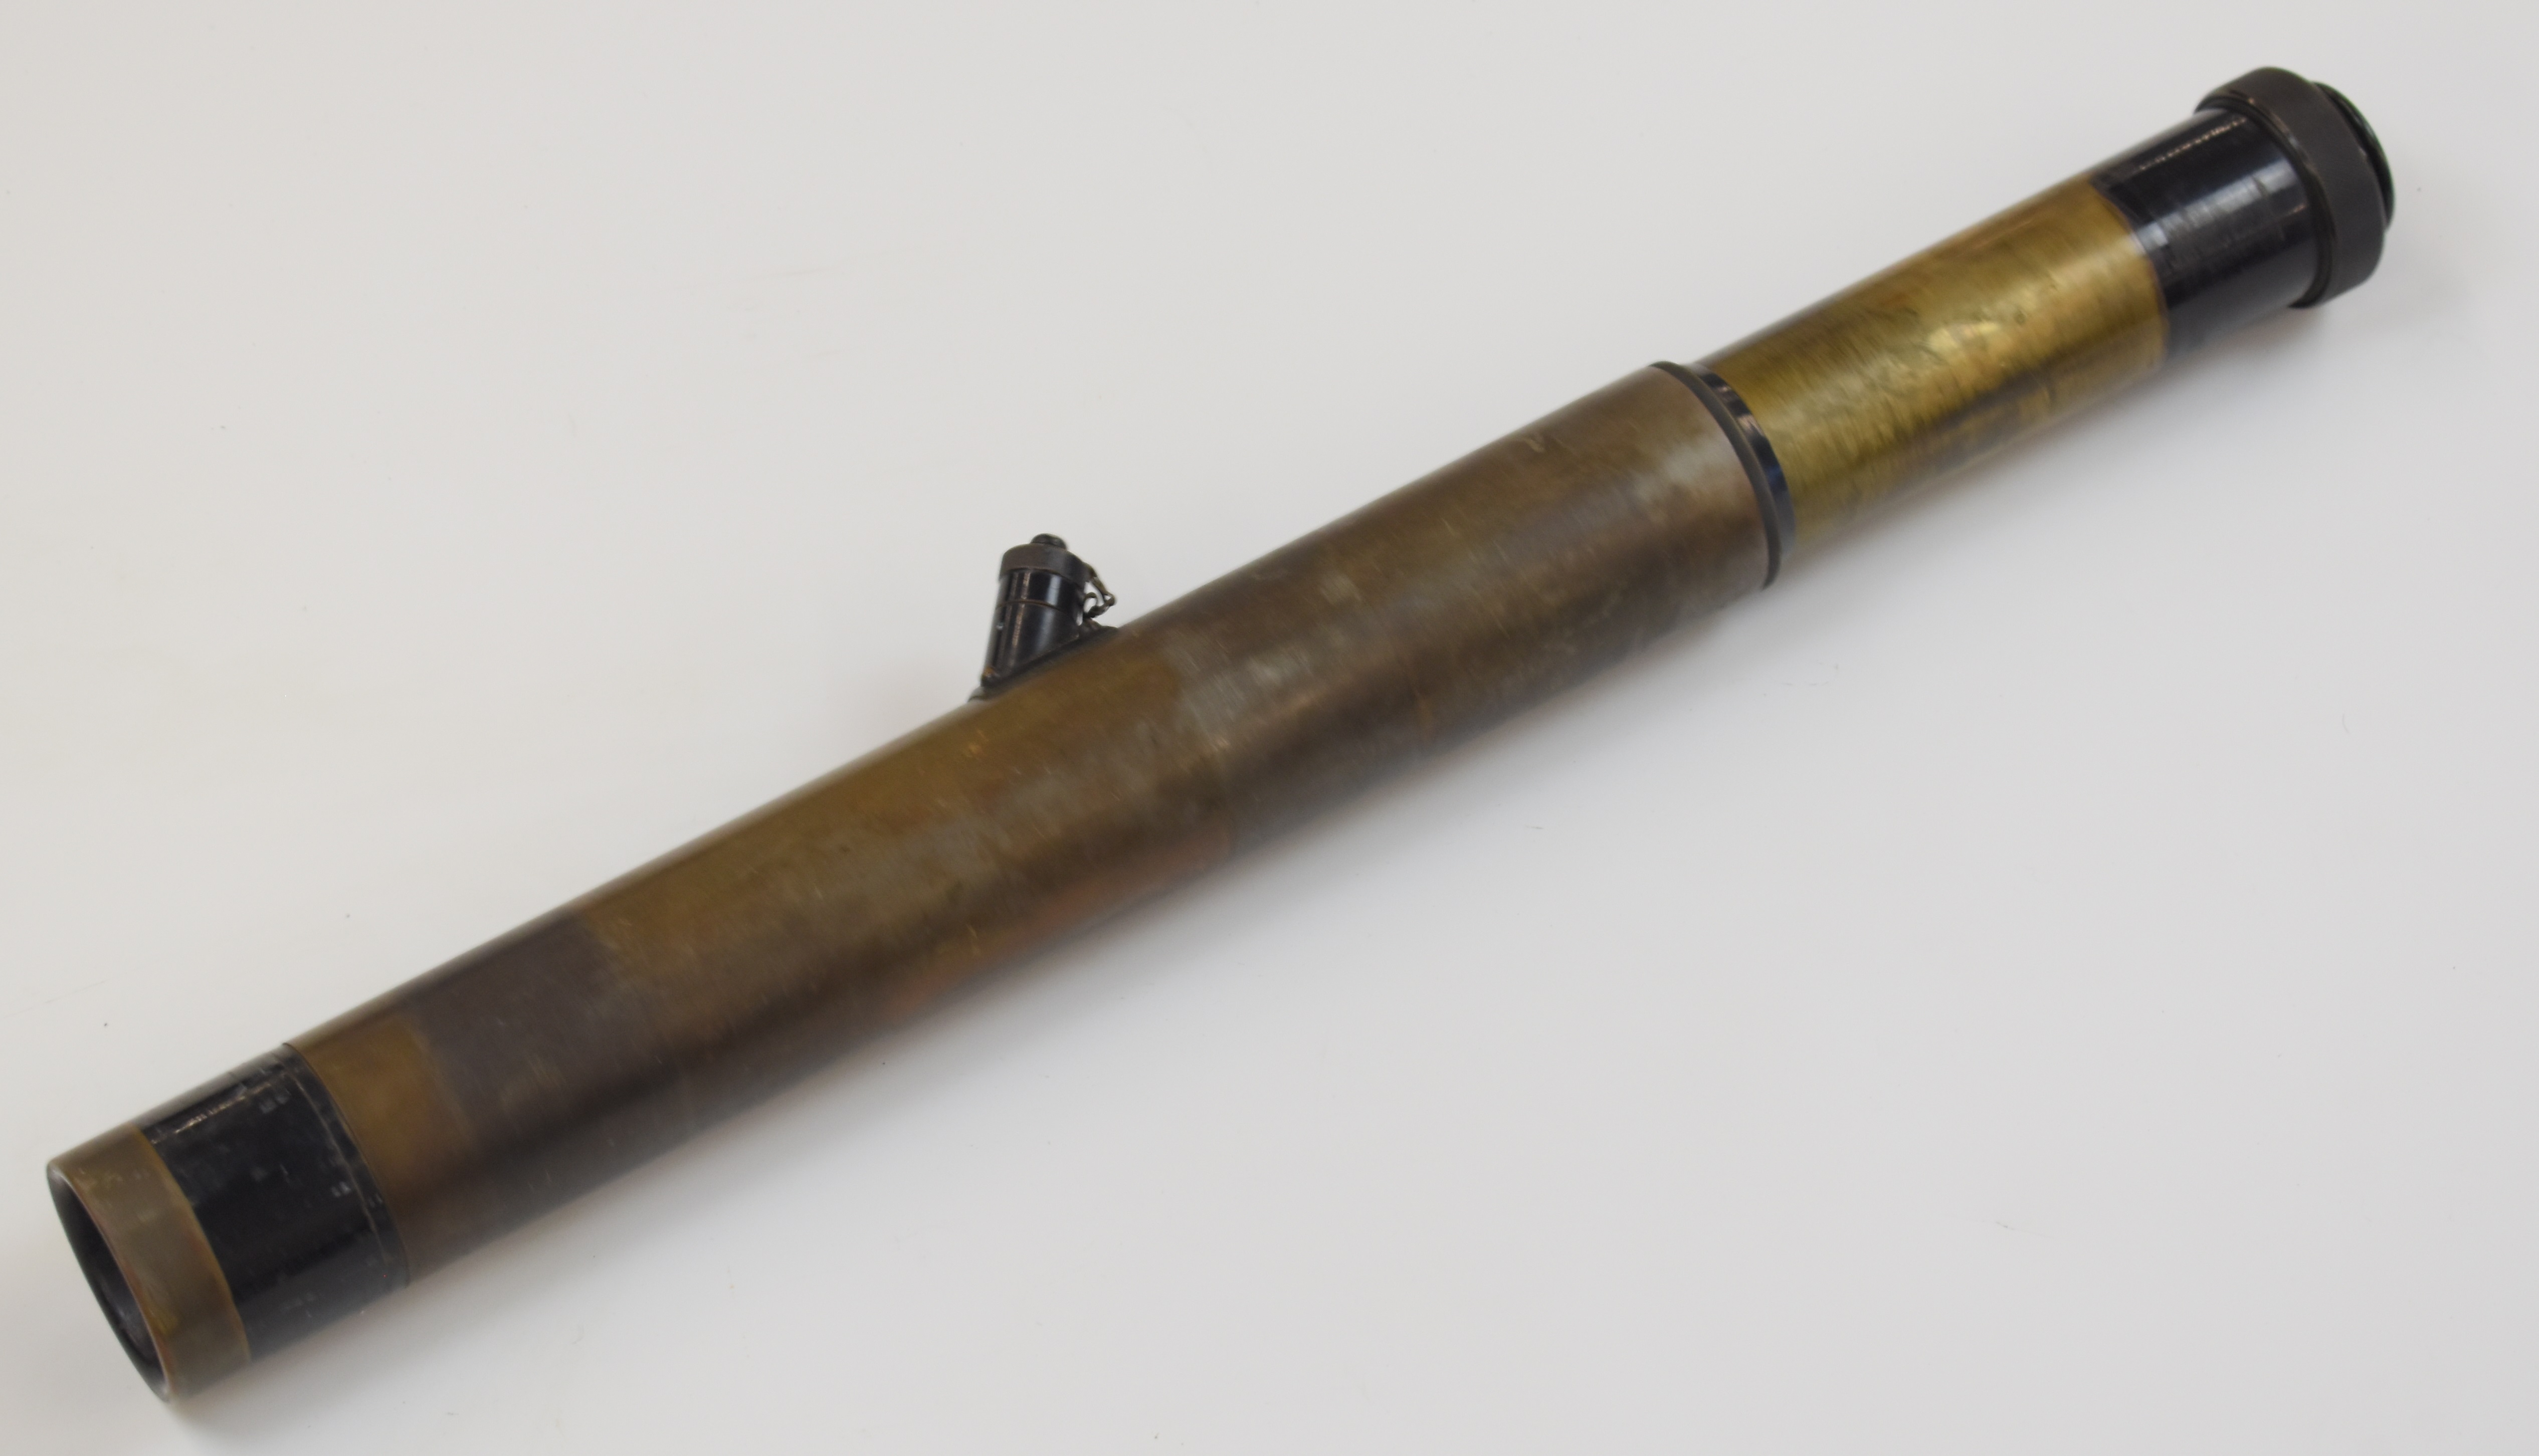 British WW1 Watson & Son G.S x8 telescope dated 1918, marked repaired by W Ottway, overall length